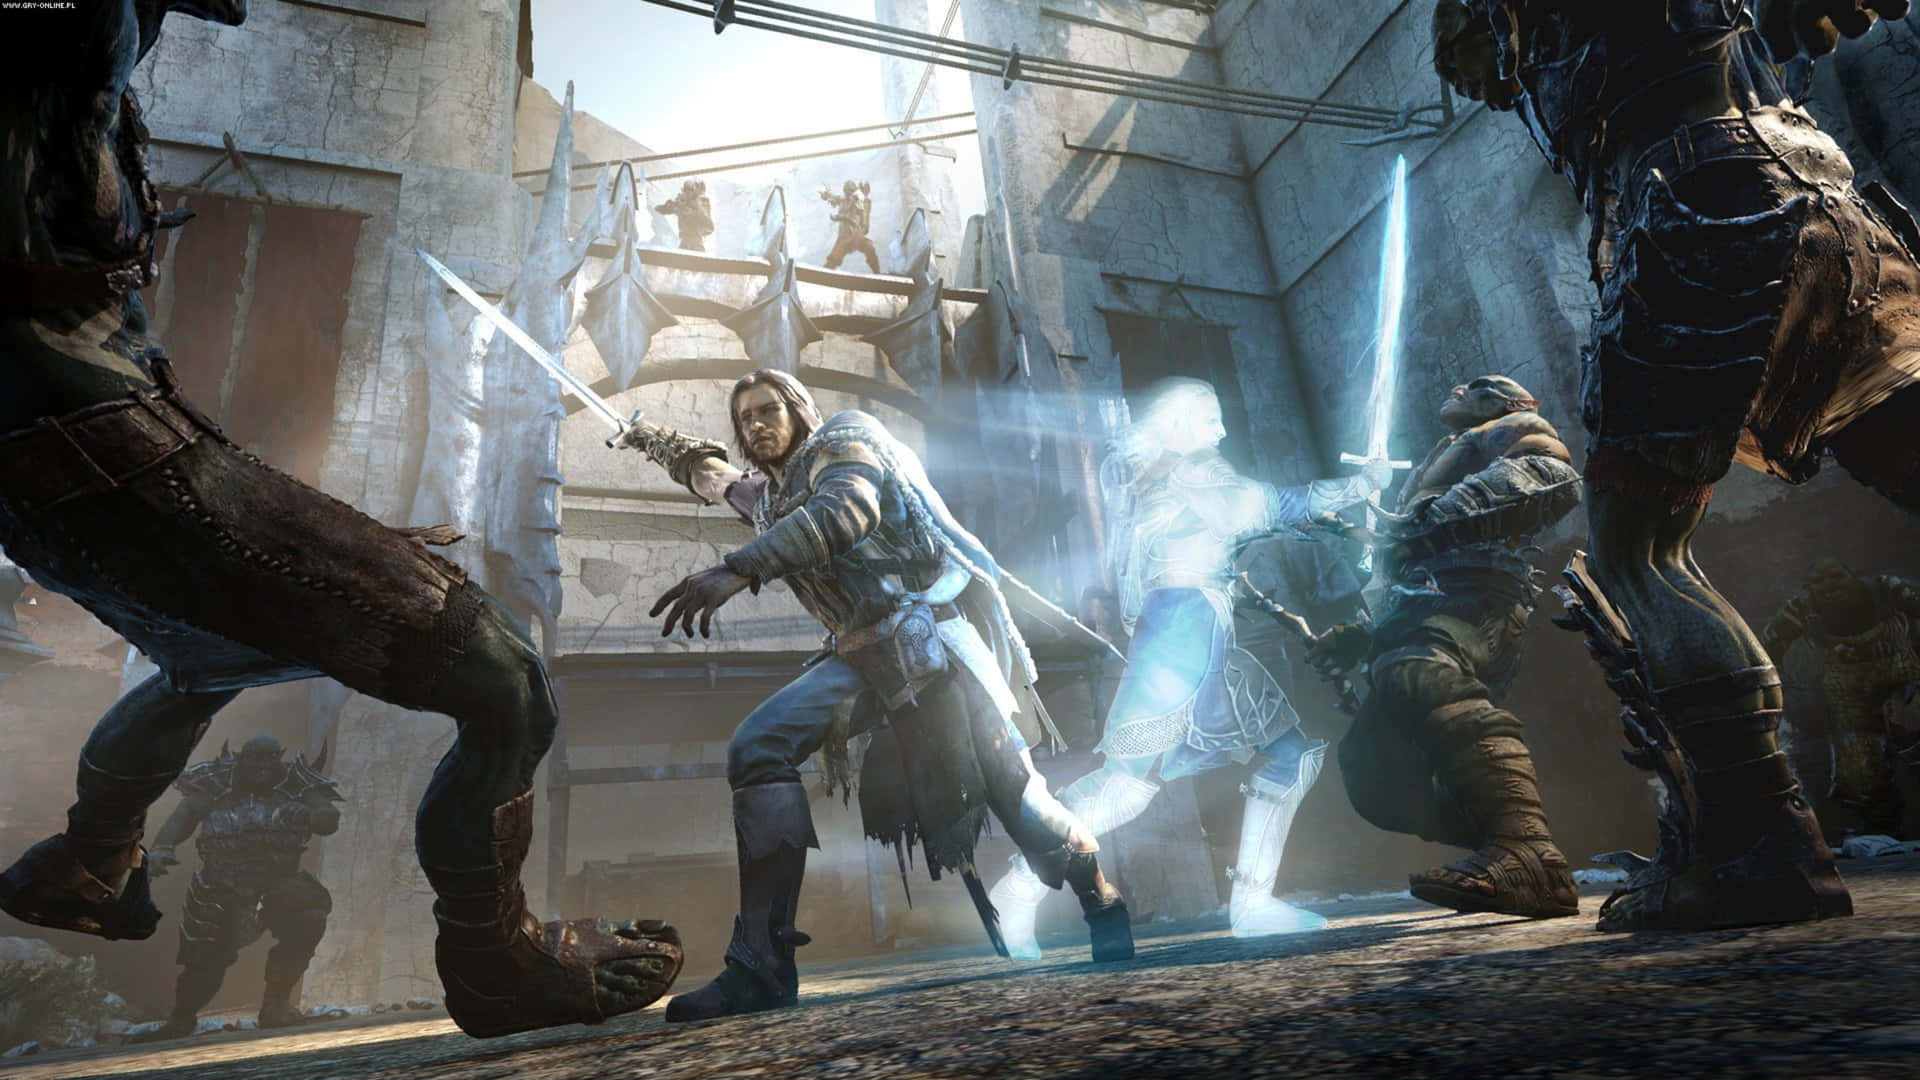 "Take Control of Talion's Adventure in 4K Shadow Of Mordor"